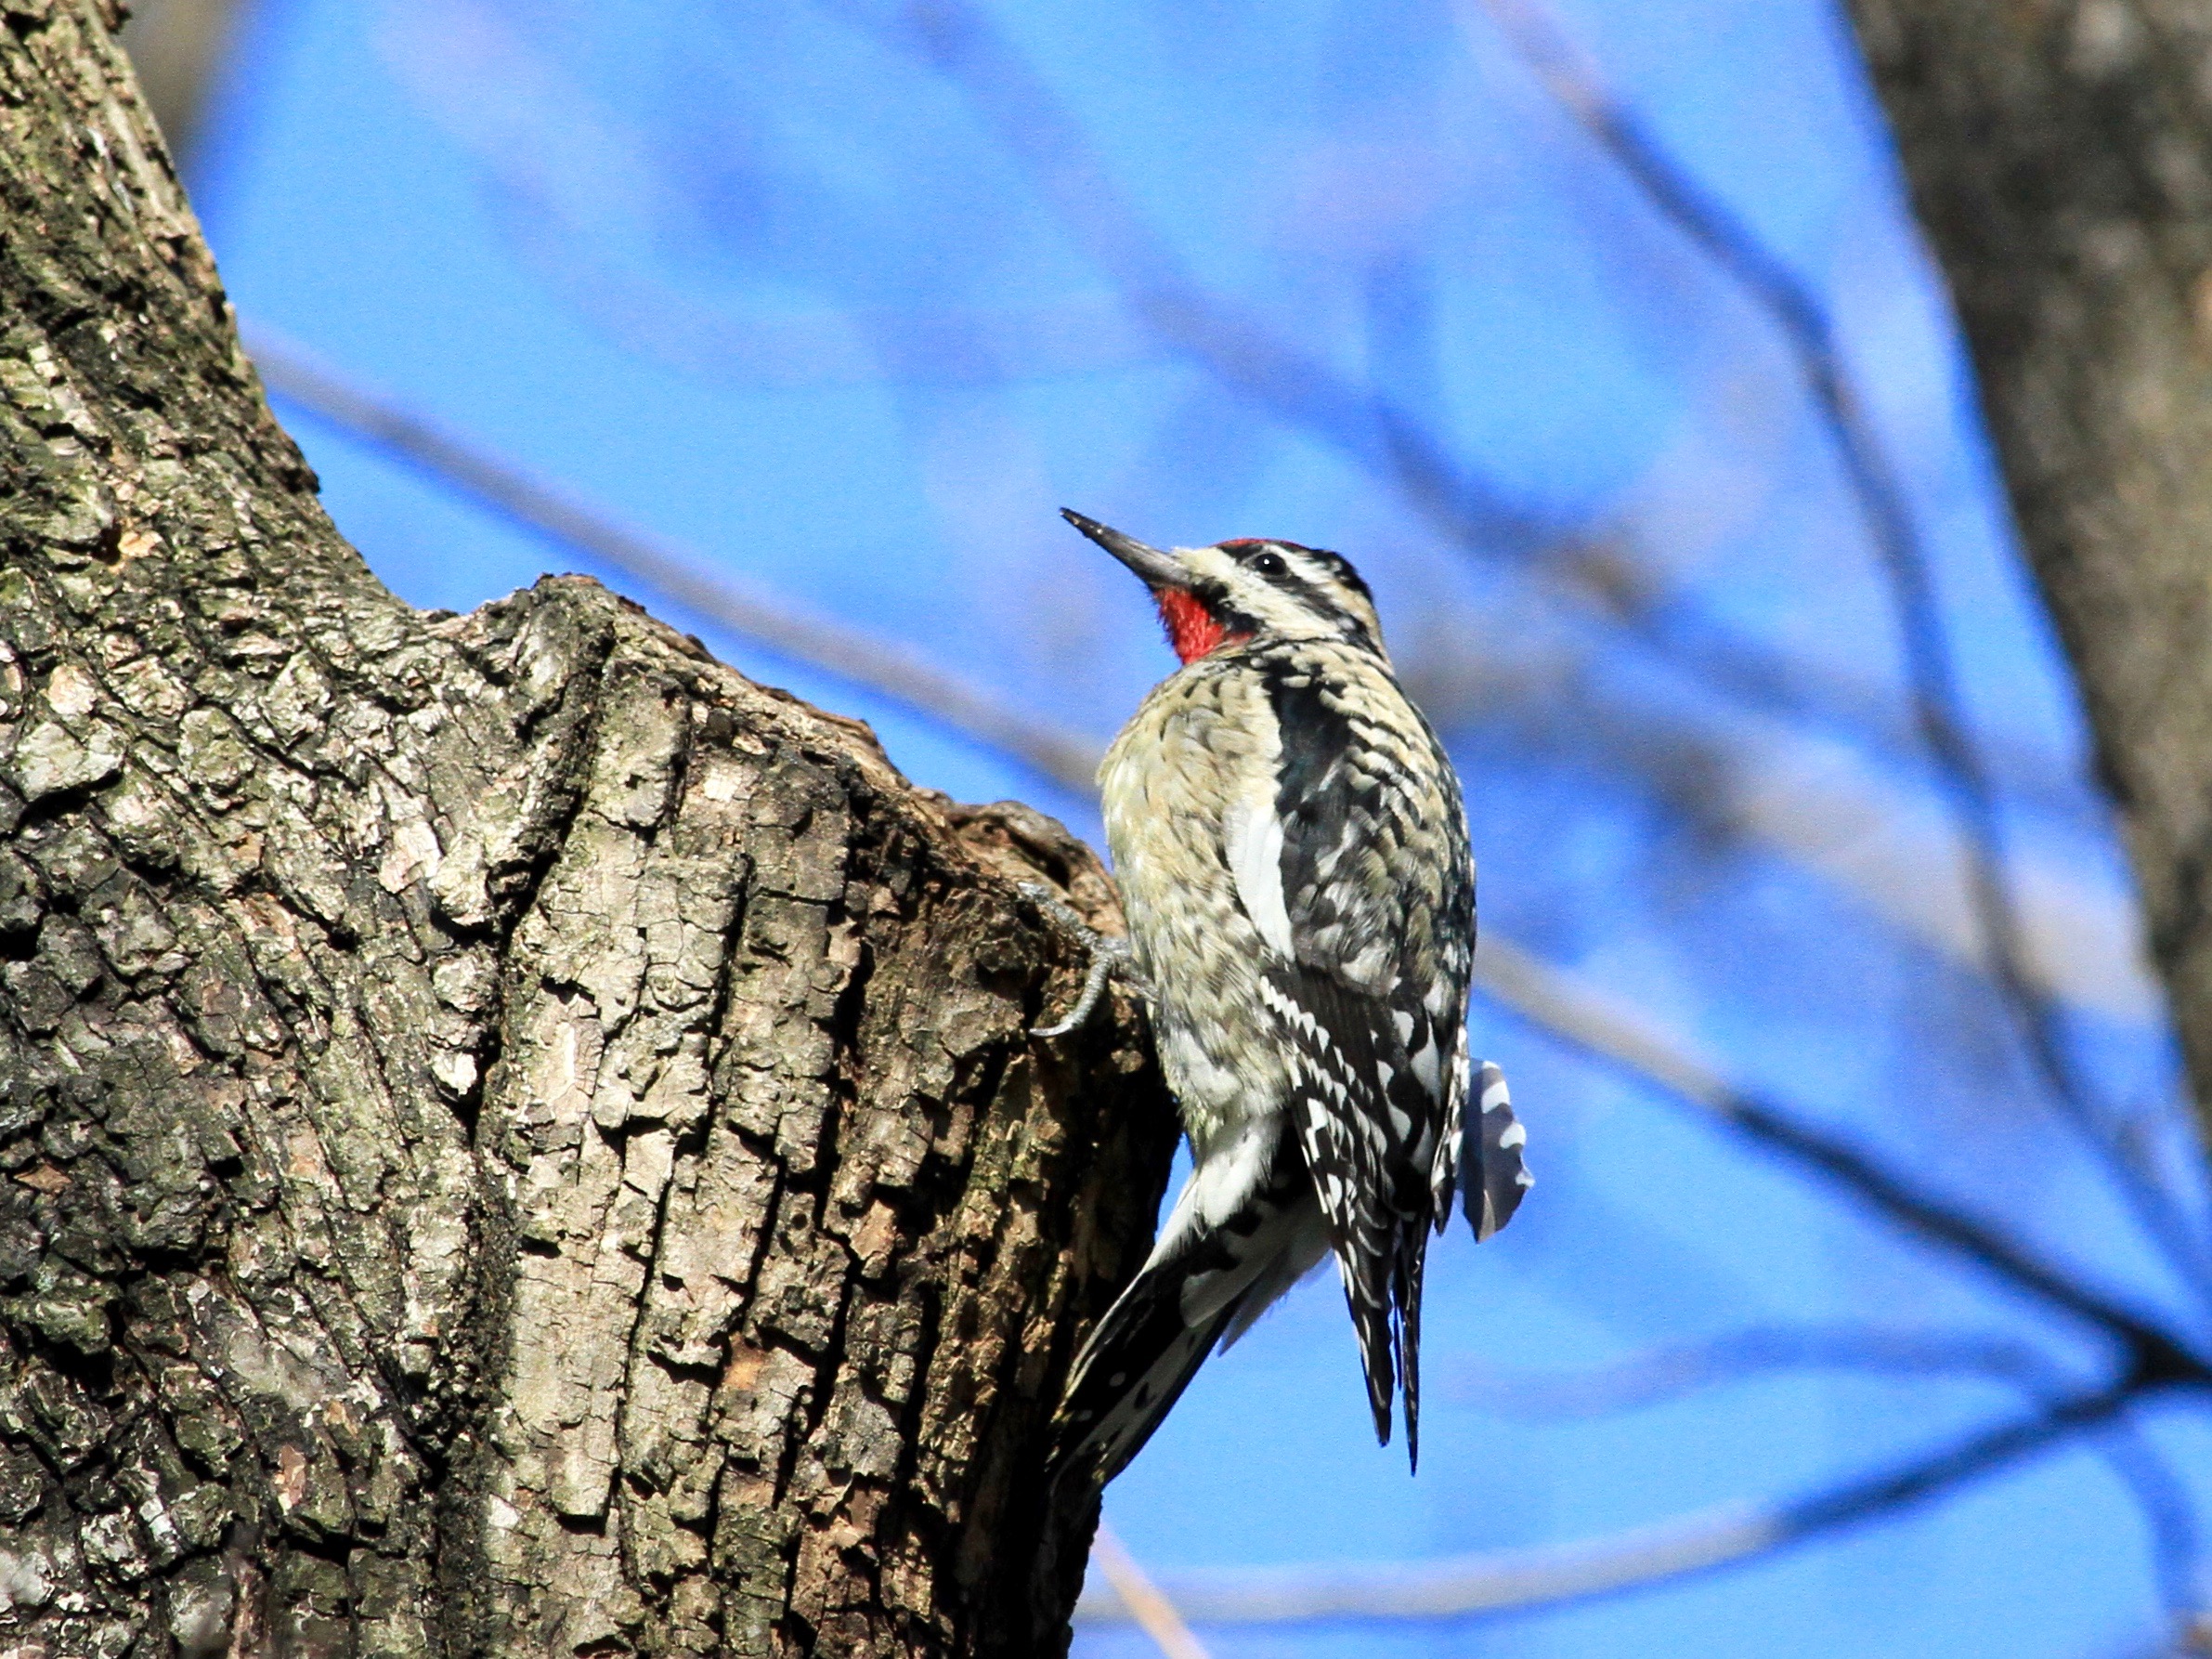 Listen for the cat-like, descending call of the Yellow-bellied Sapsucker during migration and over the winter. Photo: Loyan Beausoleil